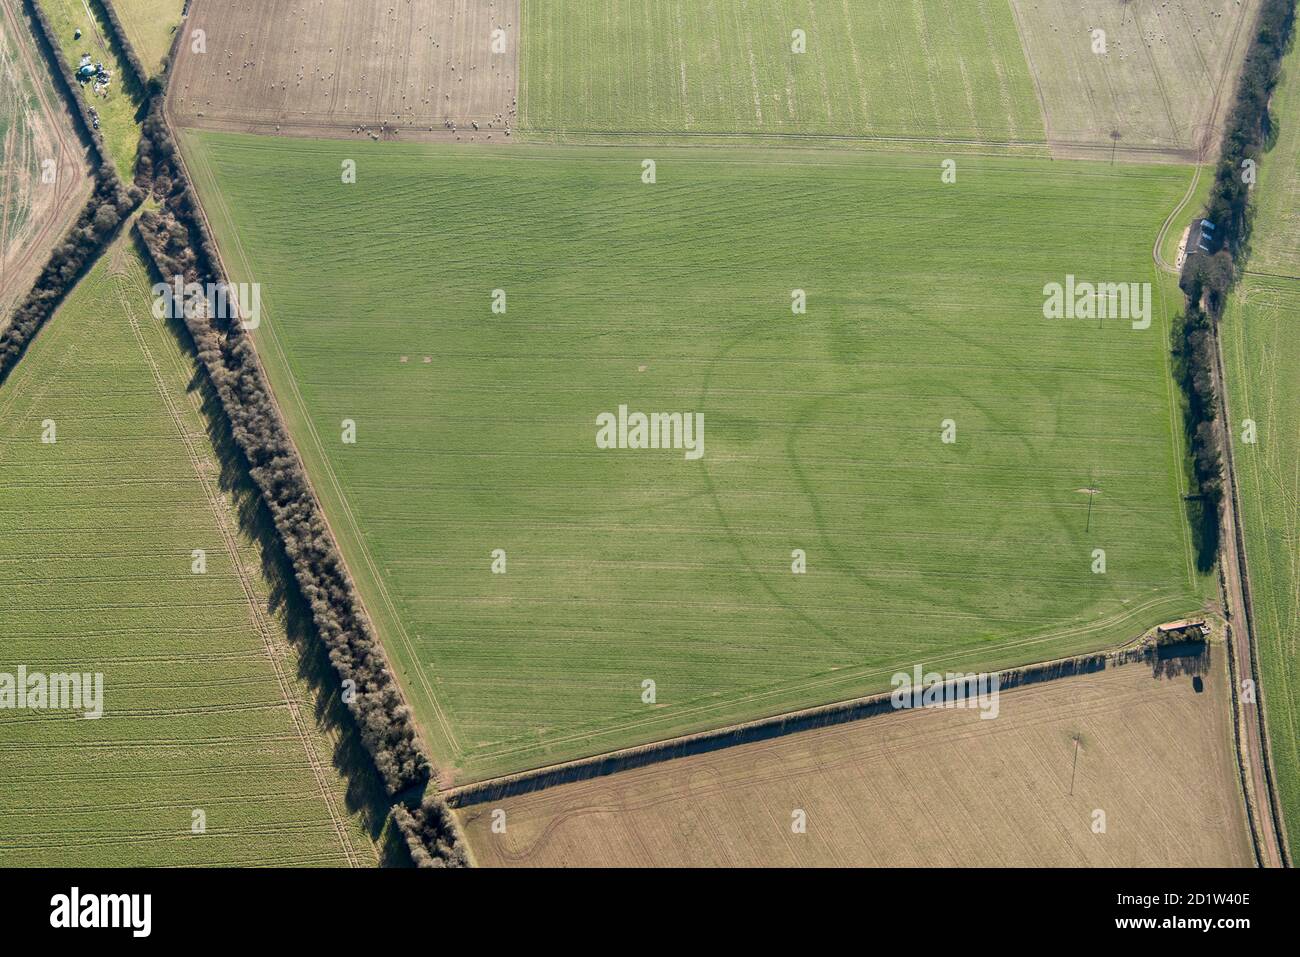 Iron Age double ditched enclosure crop mark, near South Wonston, Hampshire 2018. Aerial view. Stock Photo